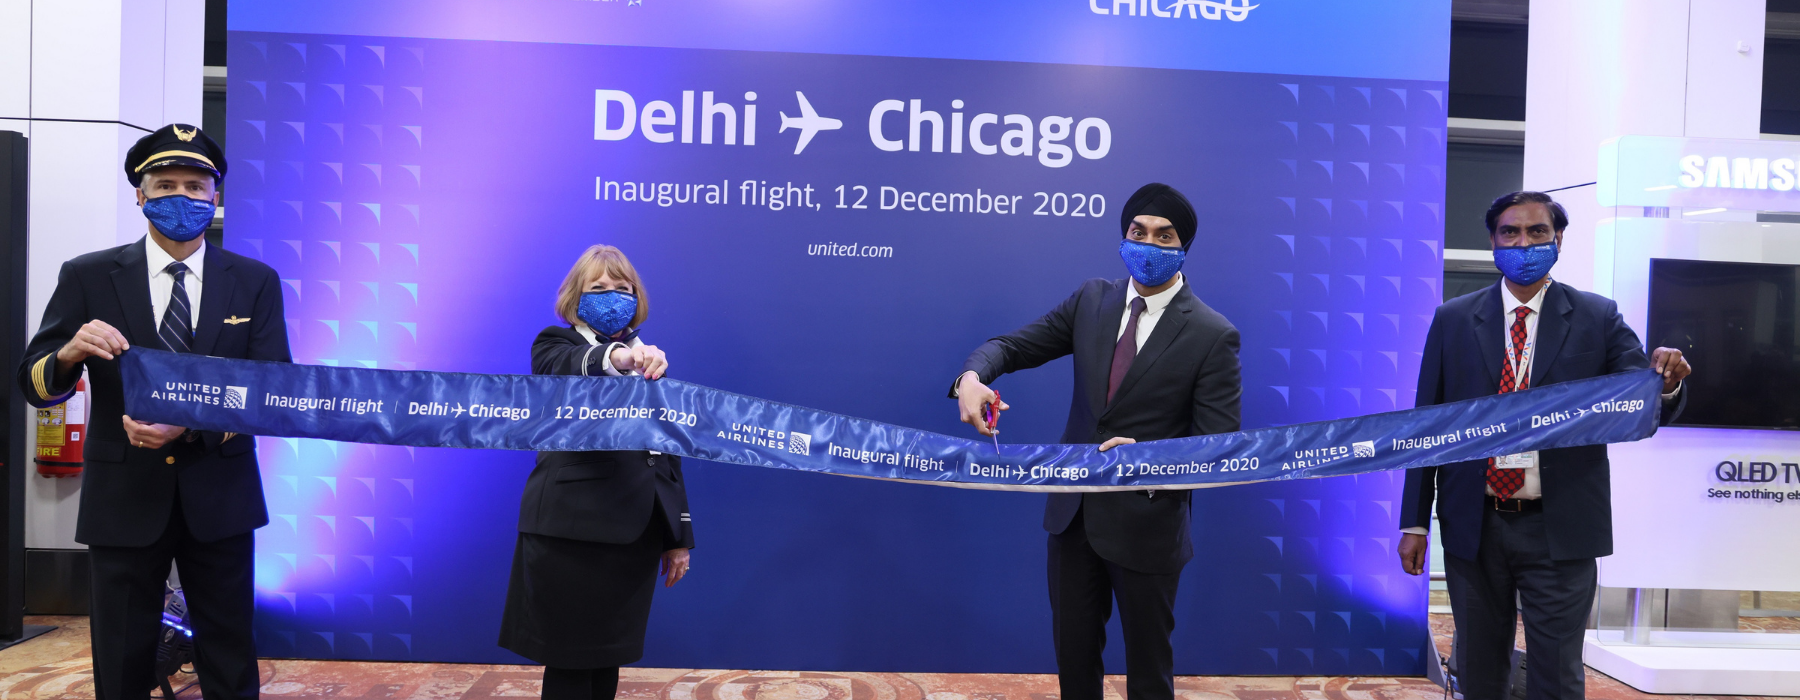 United Airlines Inaugurates Nonstop Service Between New Delhi and ChicagoUnited Airlines